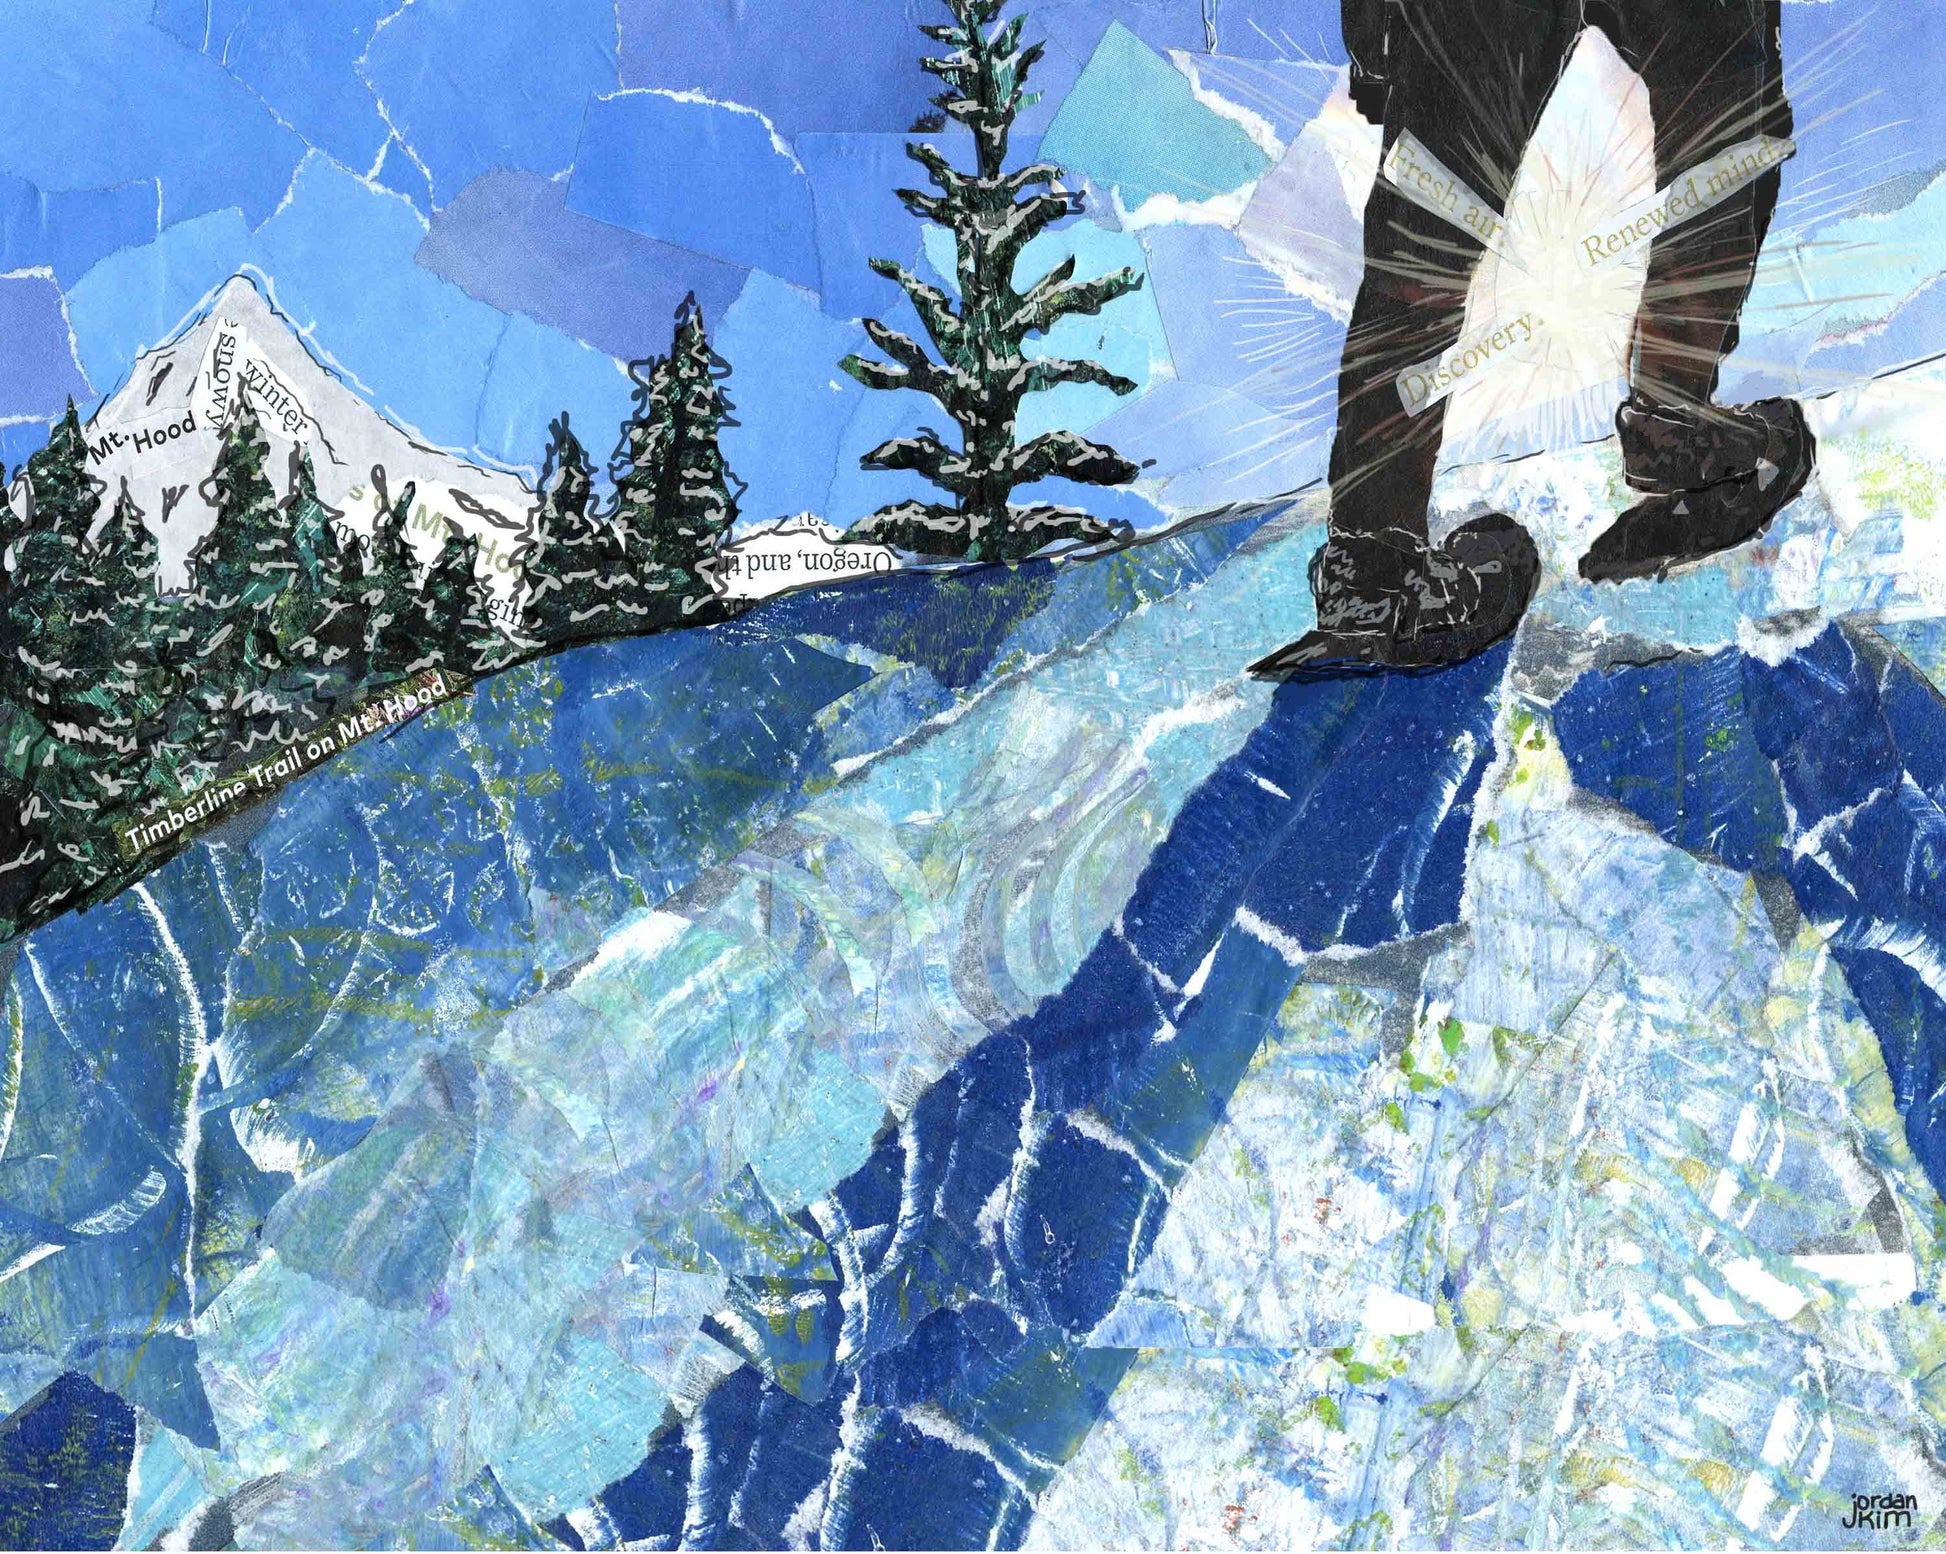 Greeting Card of a Paper Collage of a Person Snow Shoeing Near Mt. Hood-Oregon - Blank Inside